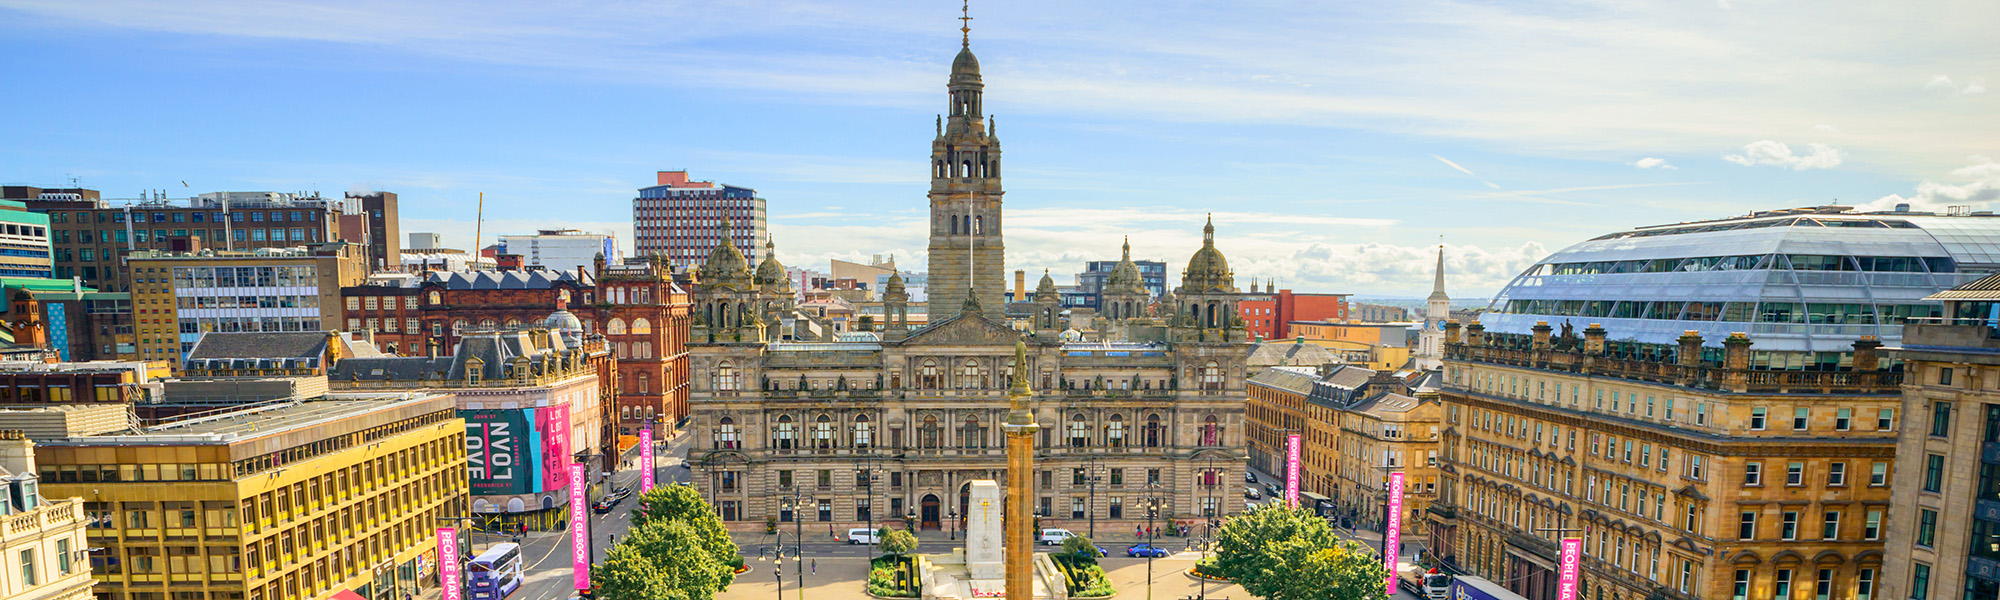 Aerial view of George Square